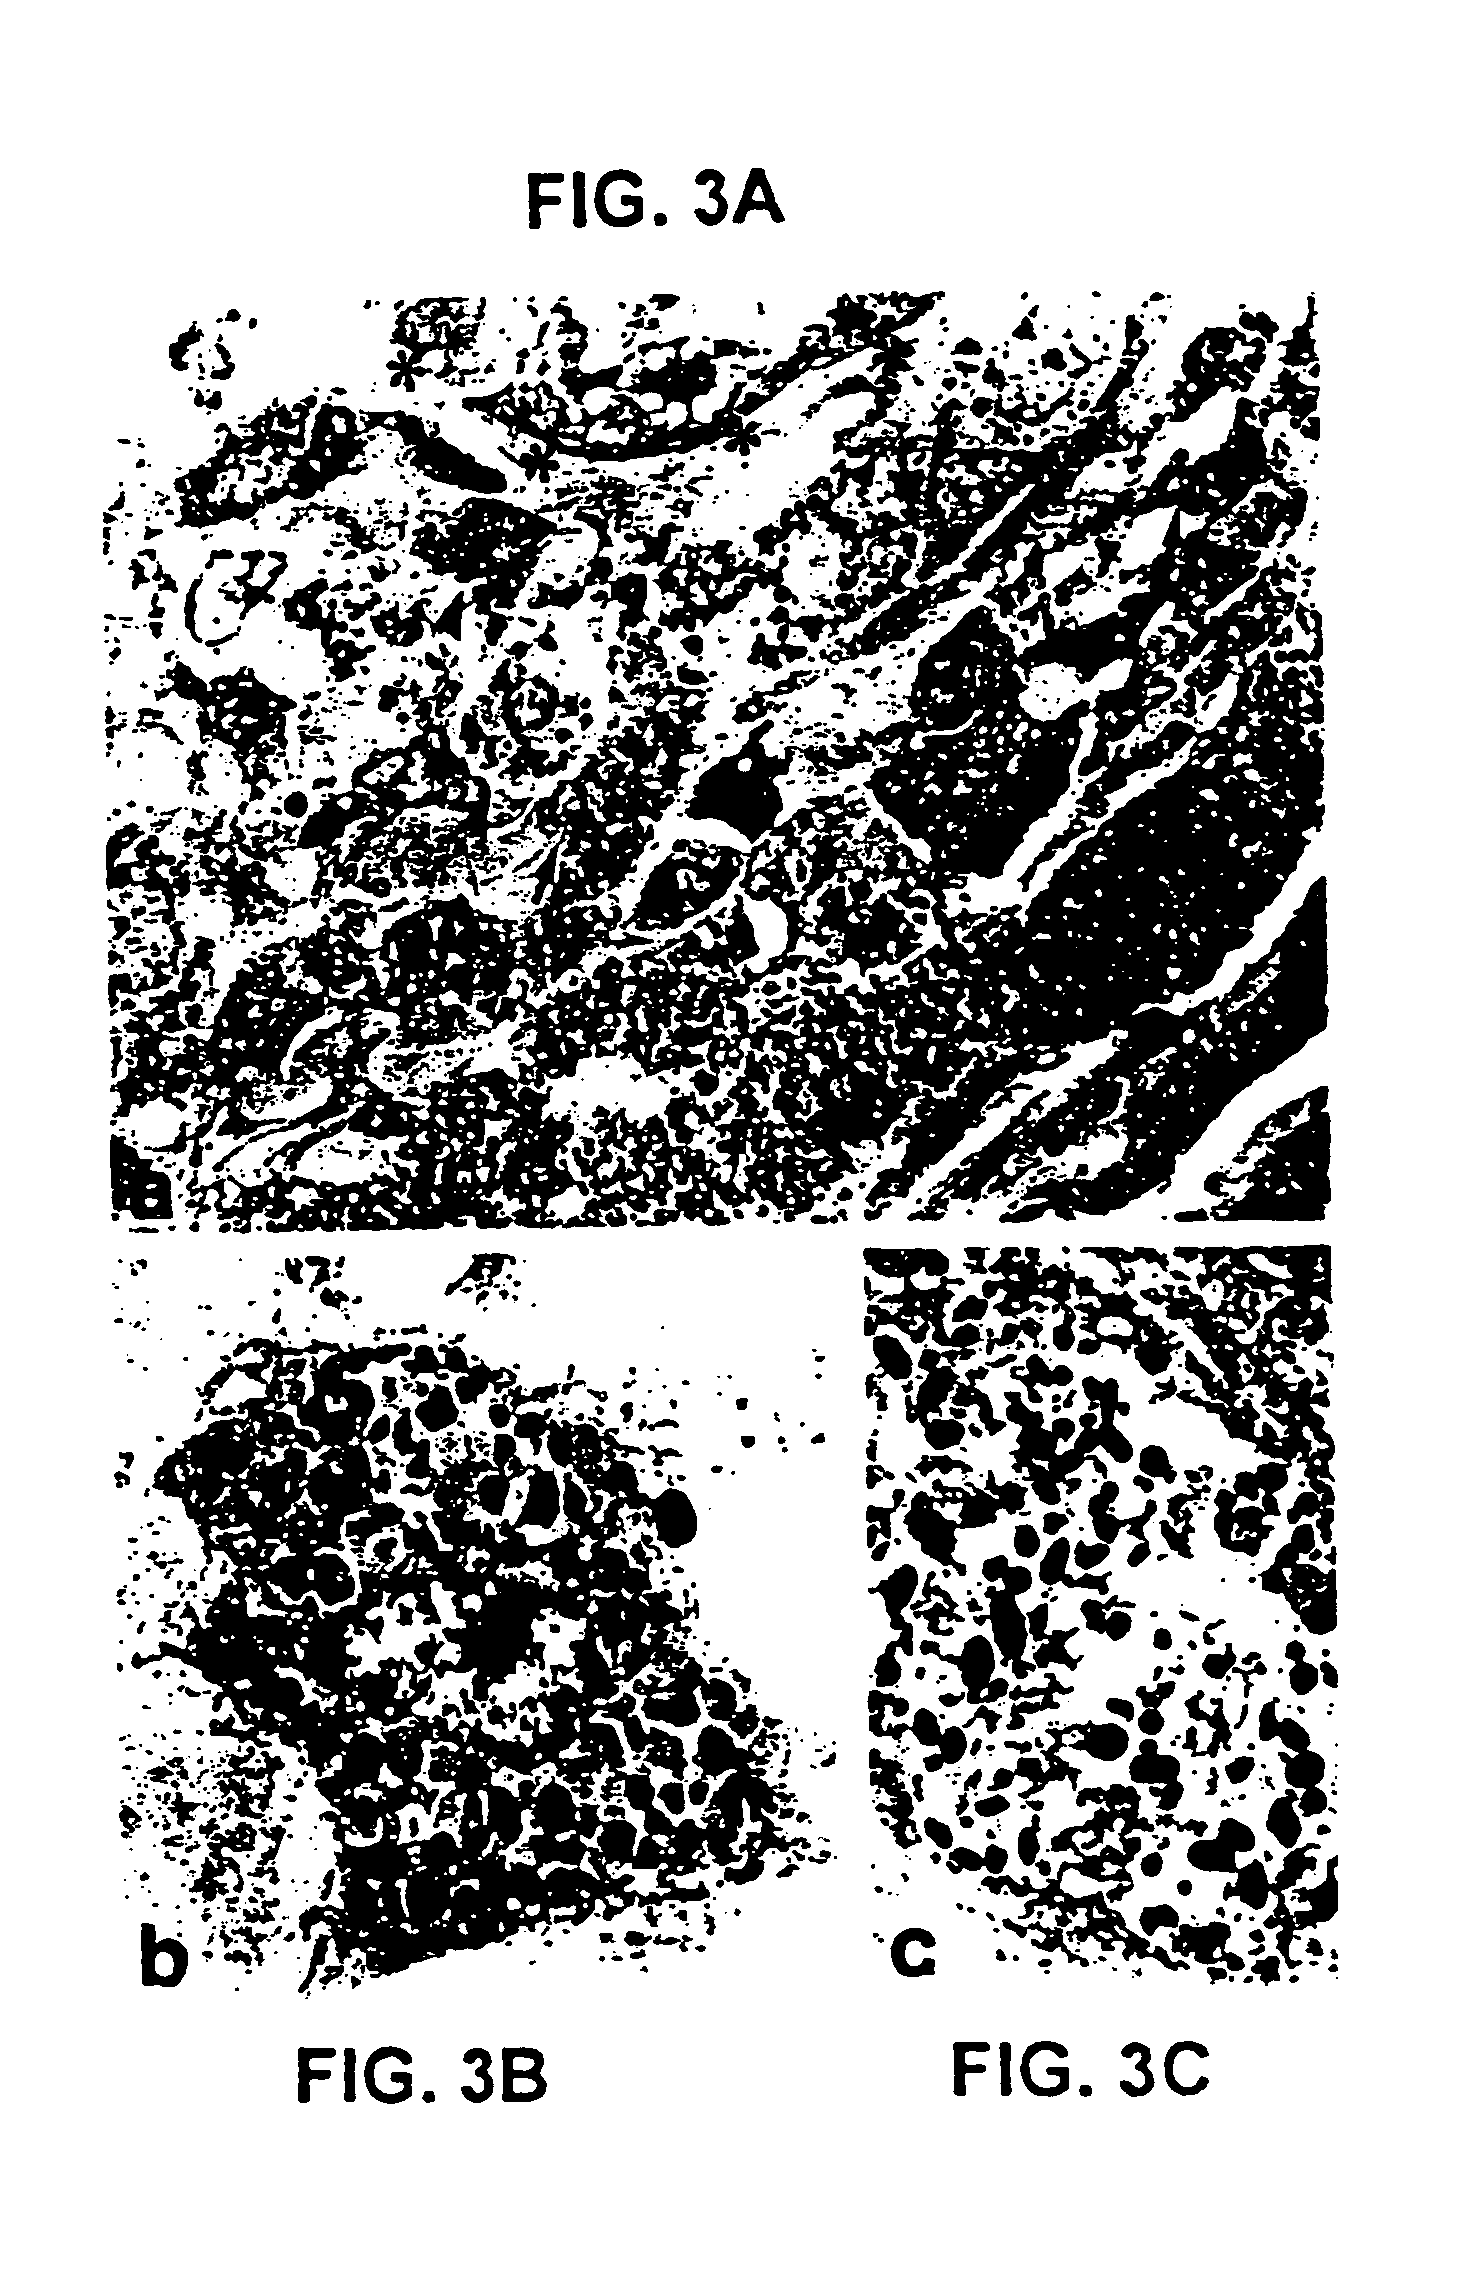 Methods for inhibiting cutaneous inflammation and hyperpigmentation